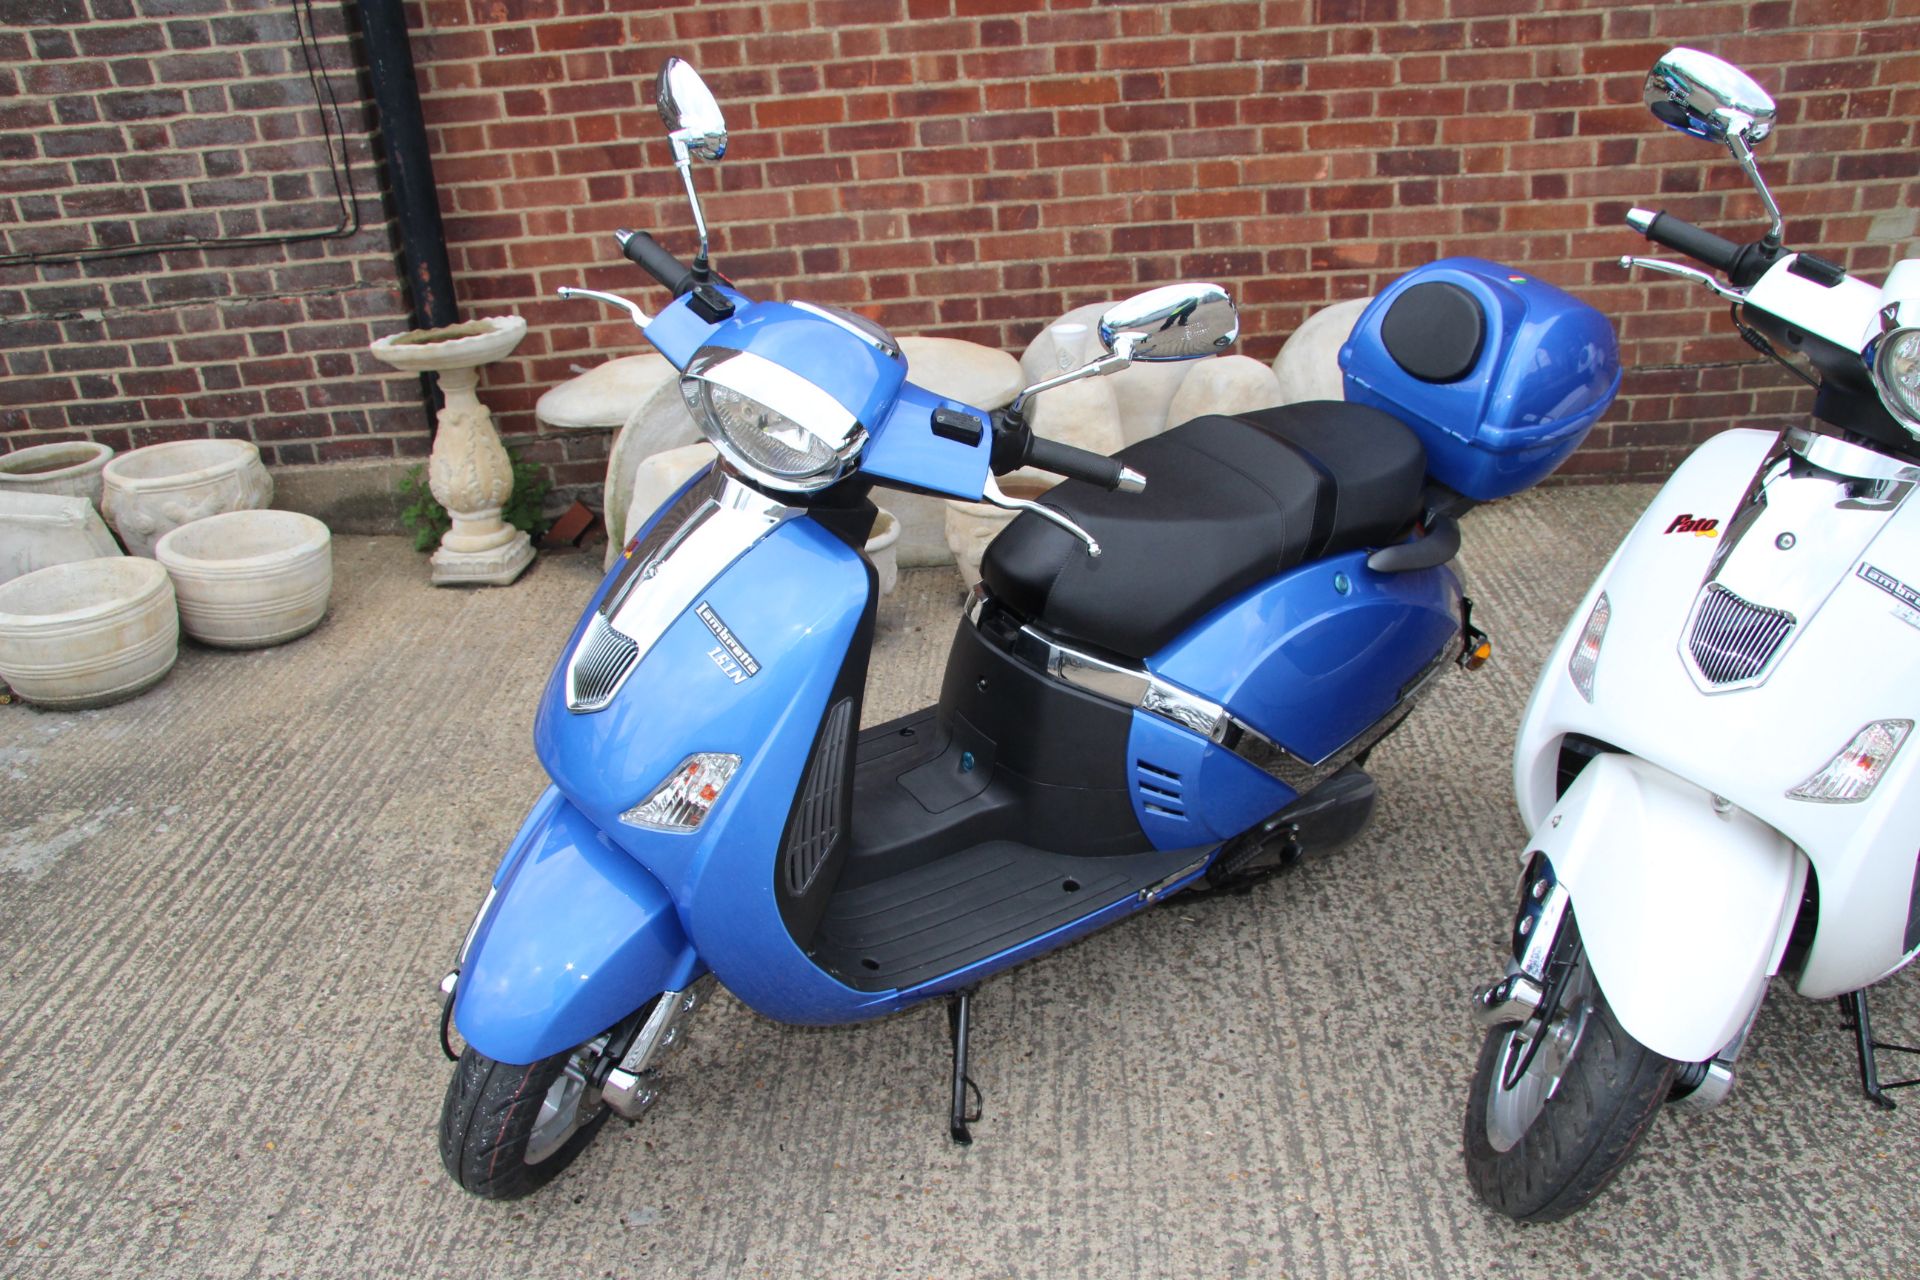 V Brand New Lambretta Pato 151cc Scooter-Silver -/Mileage 00000 Boxed ISP 1250 (Motorcycle Movers)